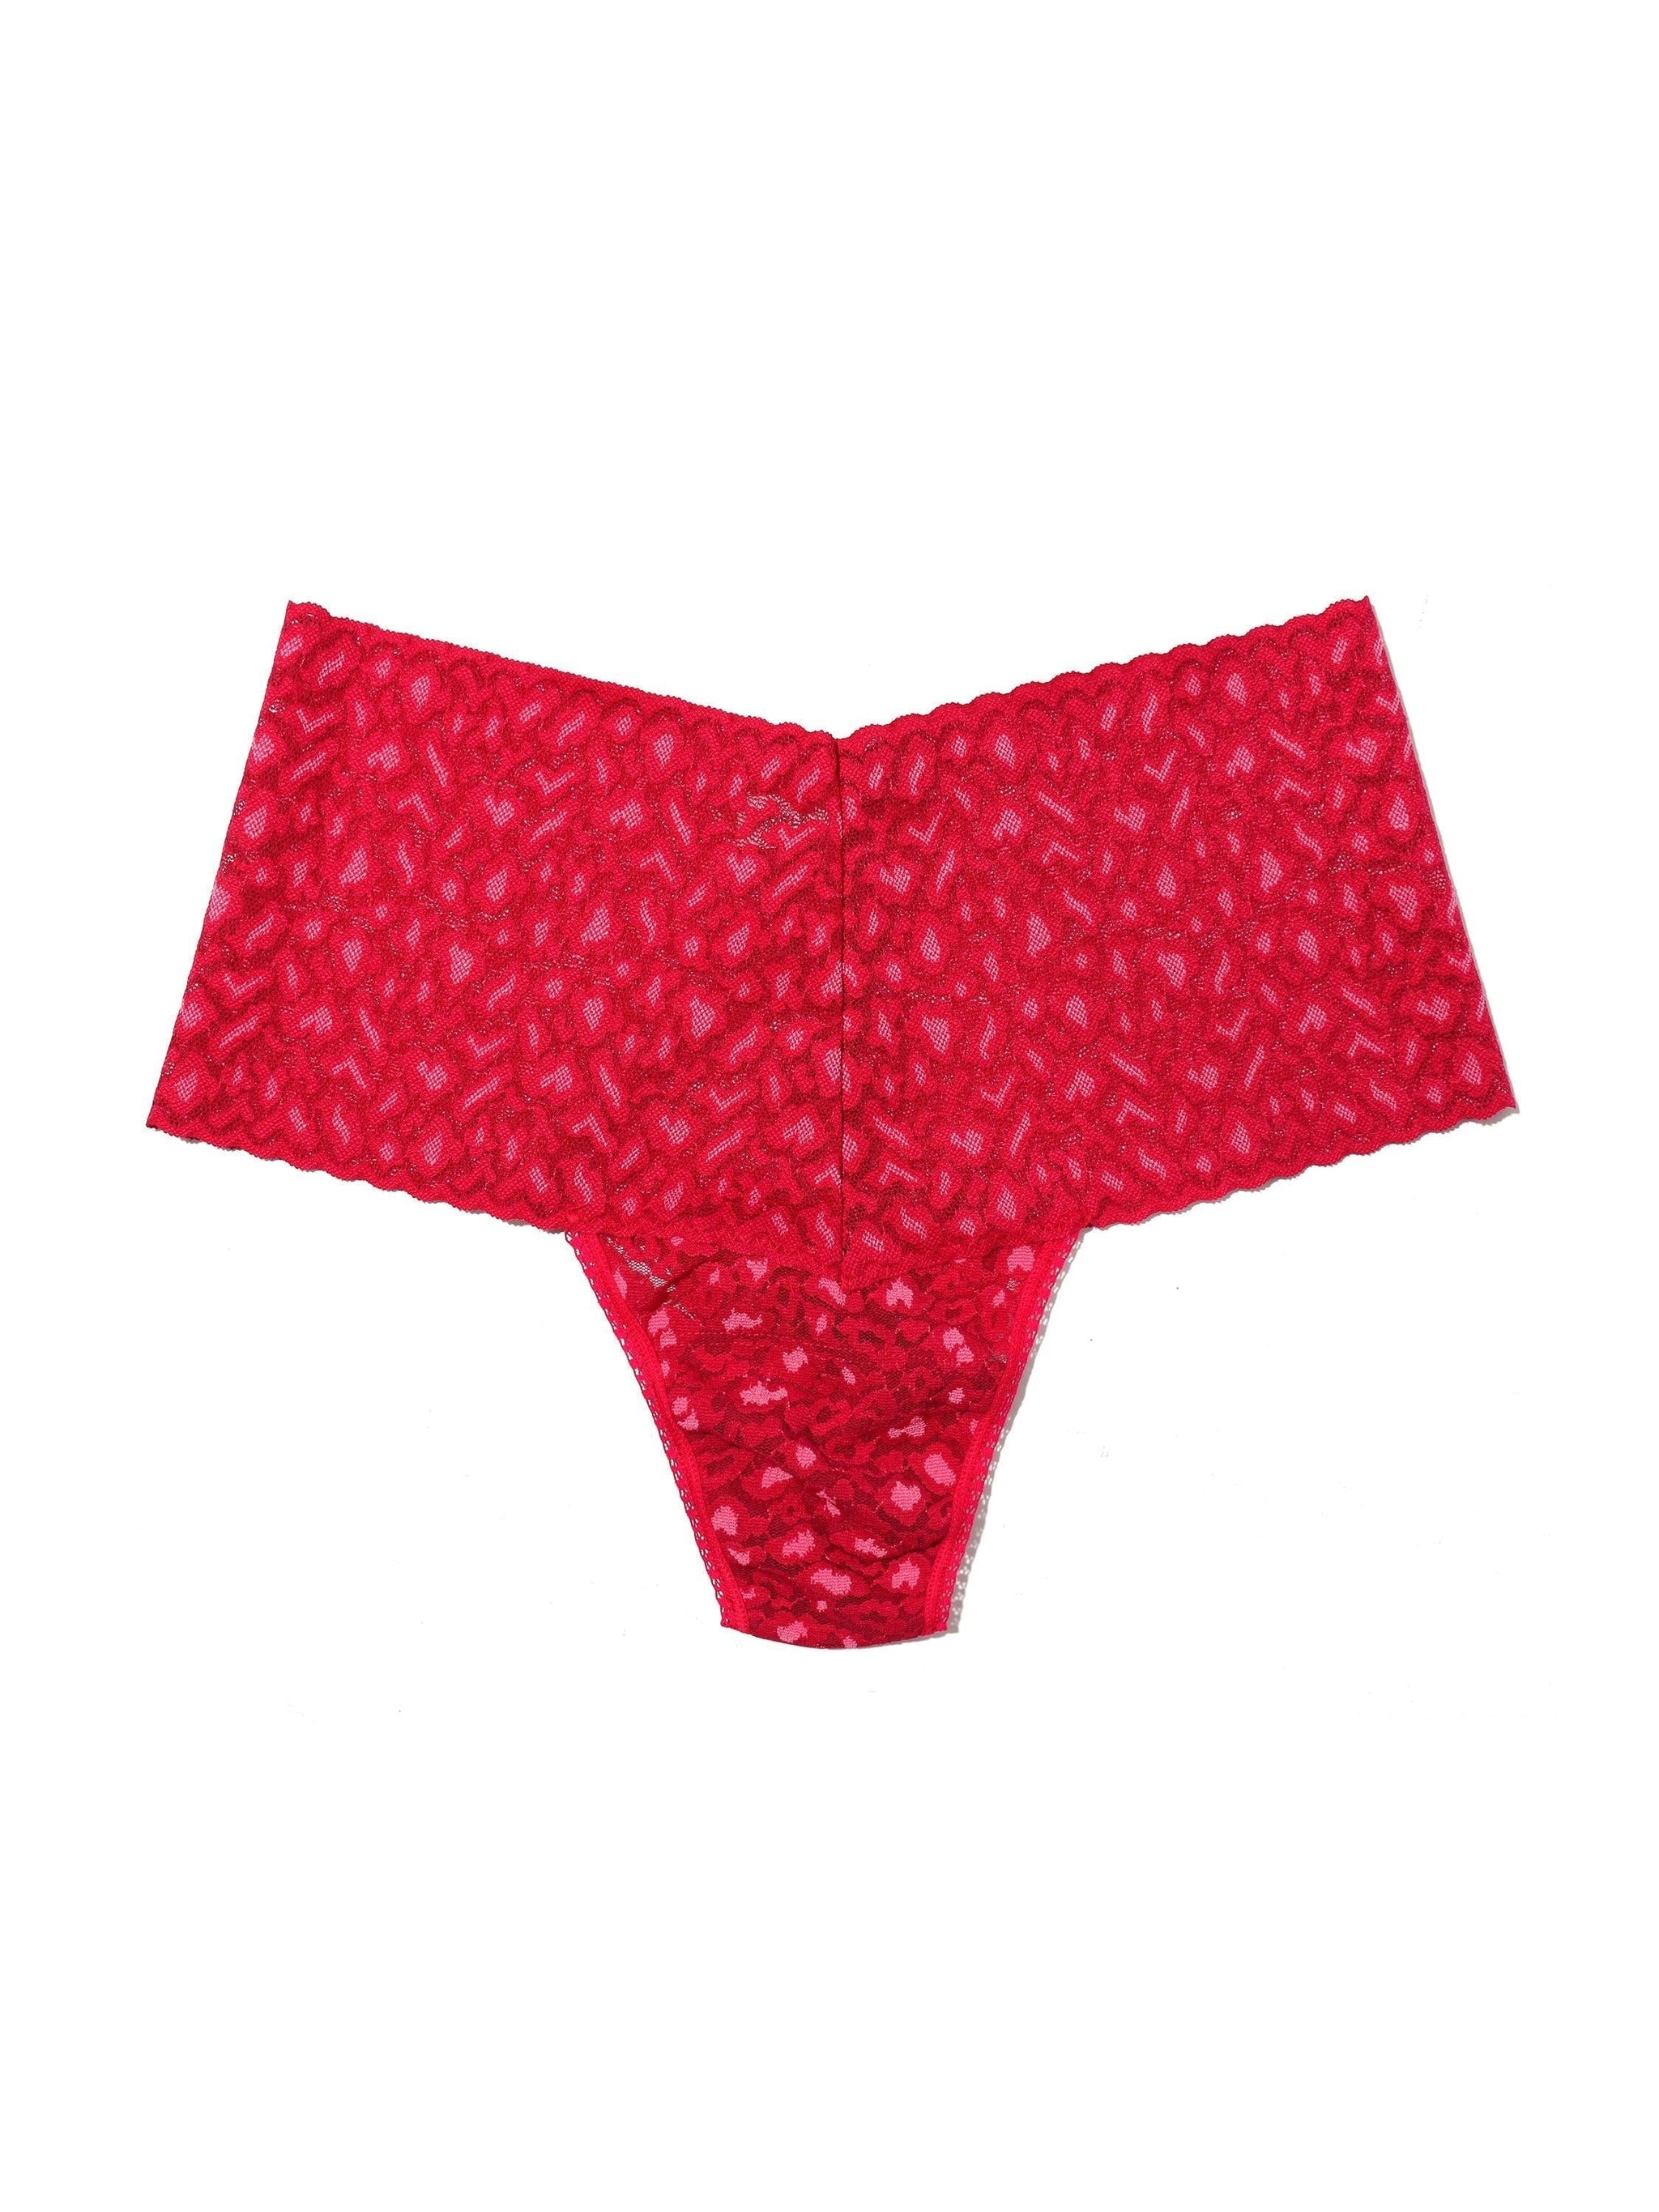 Cross-Dyed Leopard Retro Thong Berry Sangria Sale